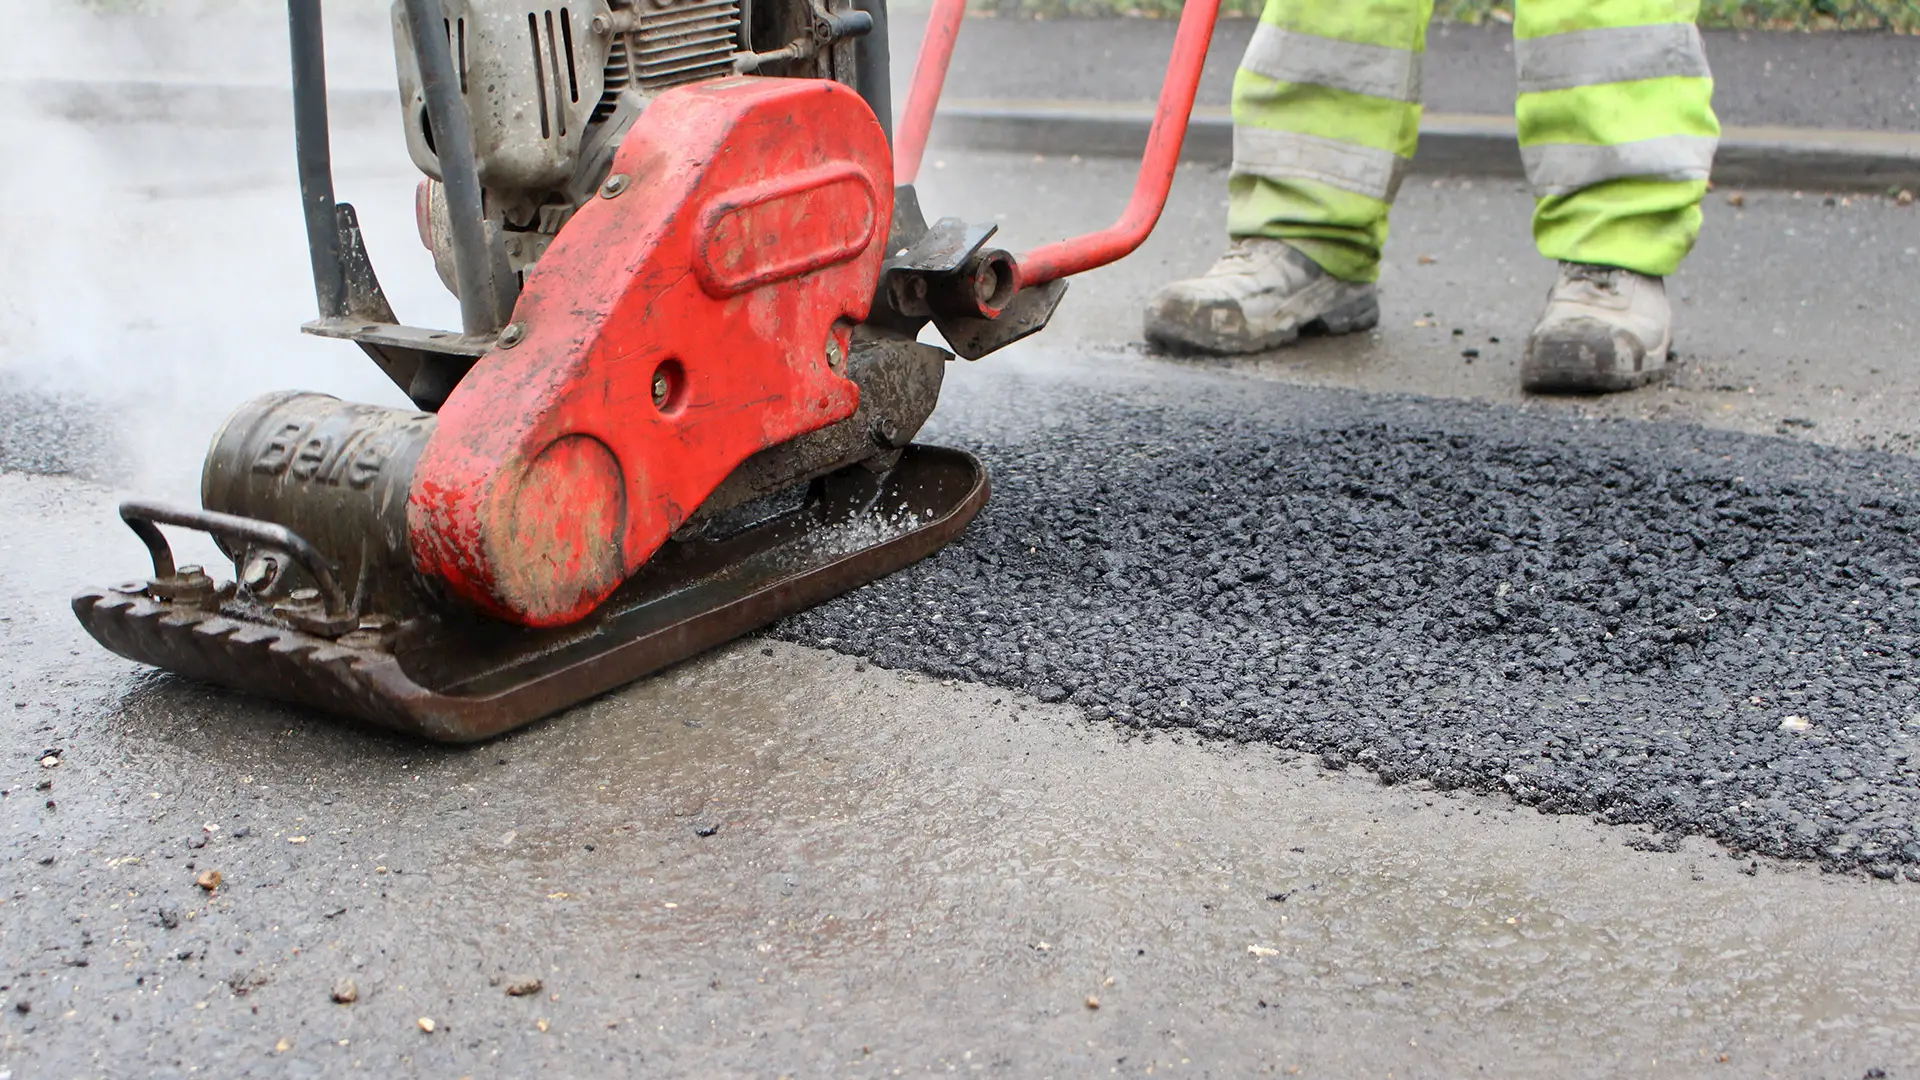 Experienced pothole repair contractors in Leicester